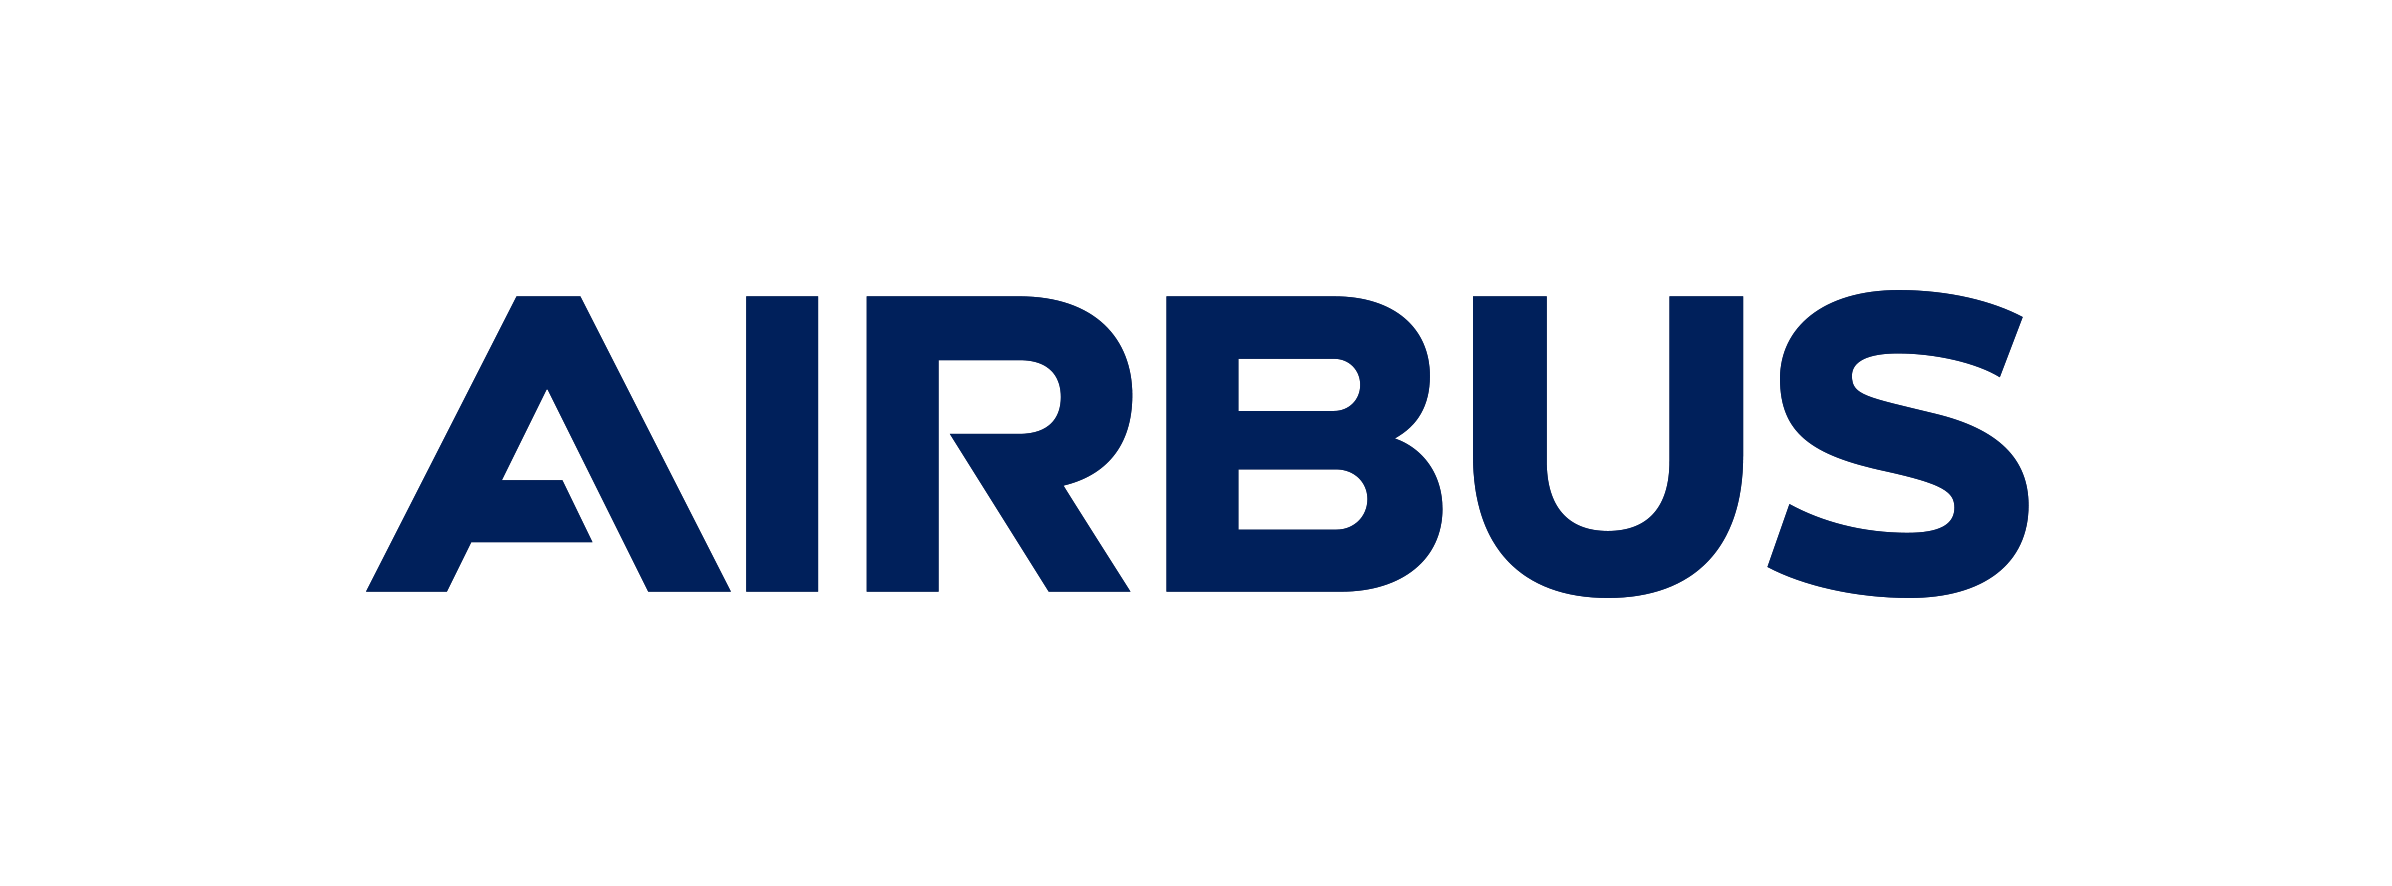 Airbus Financial Services overview